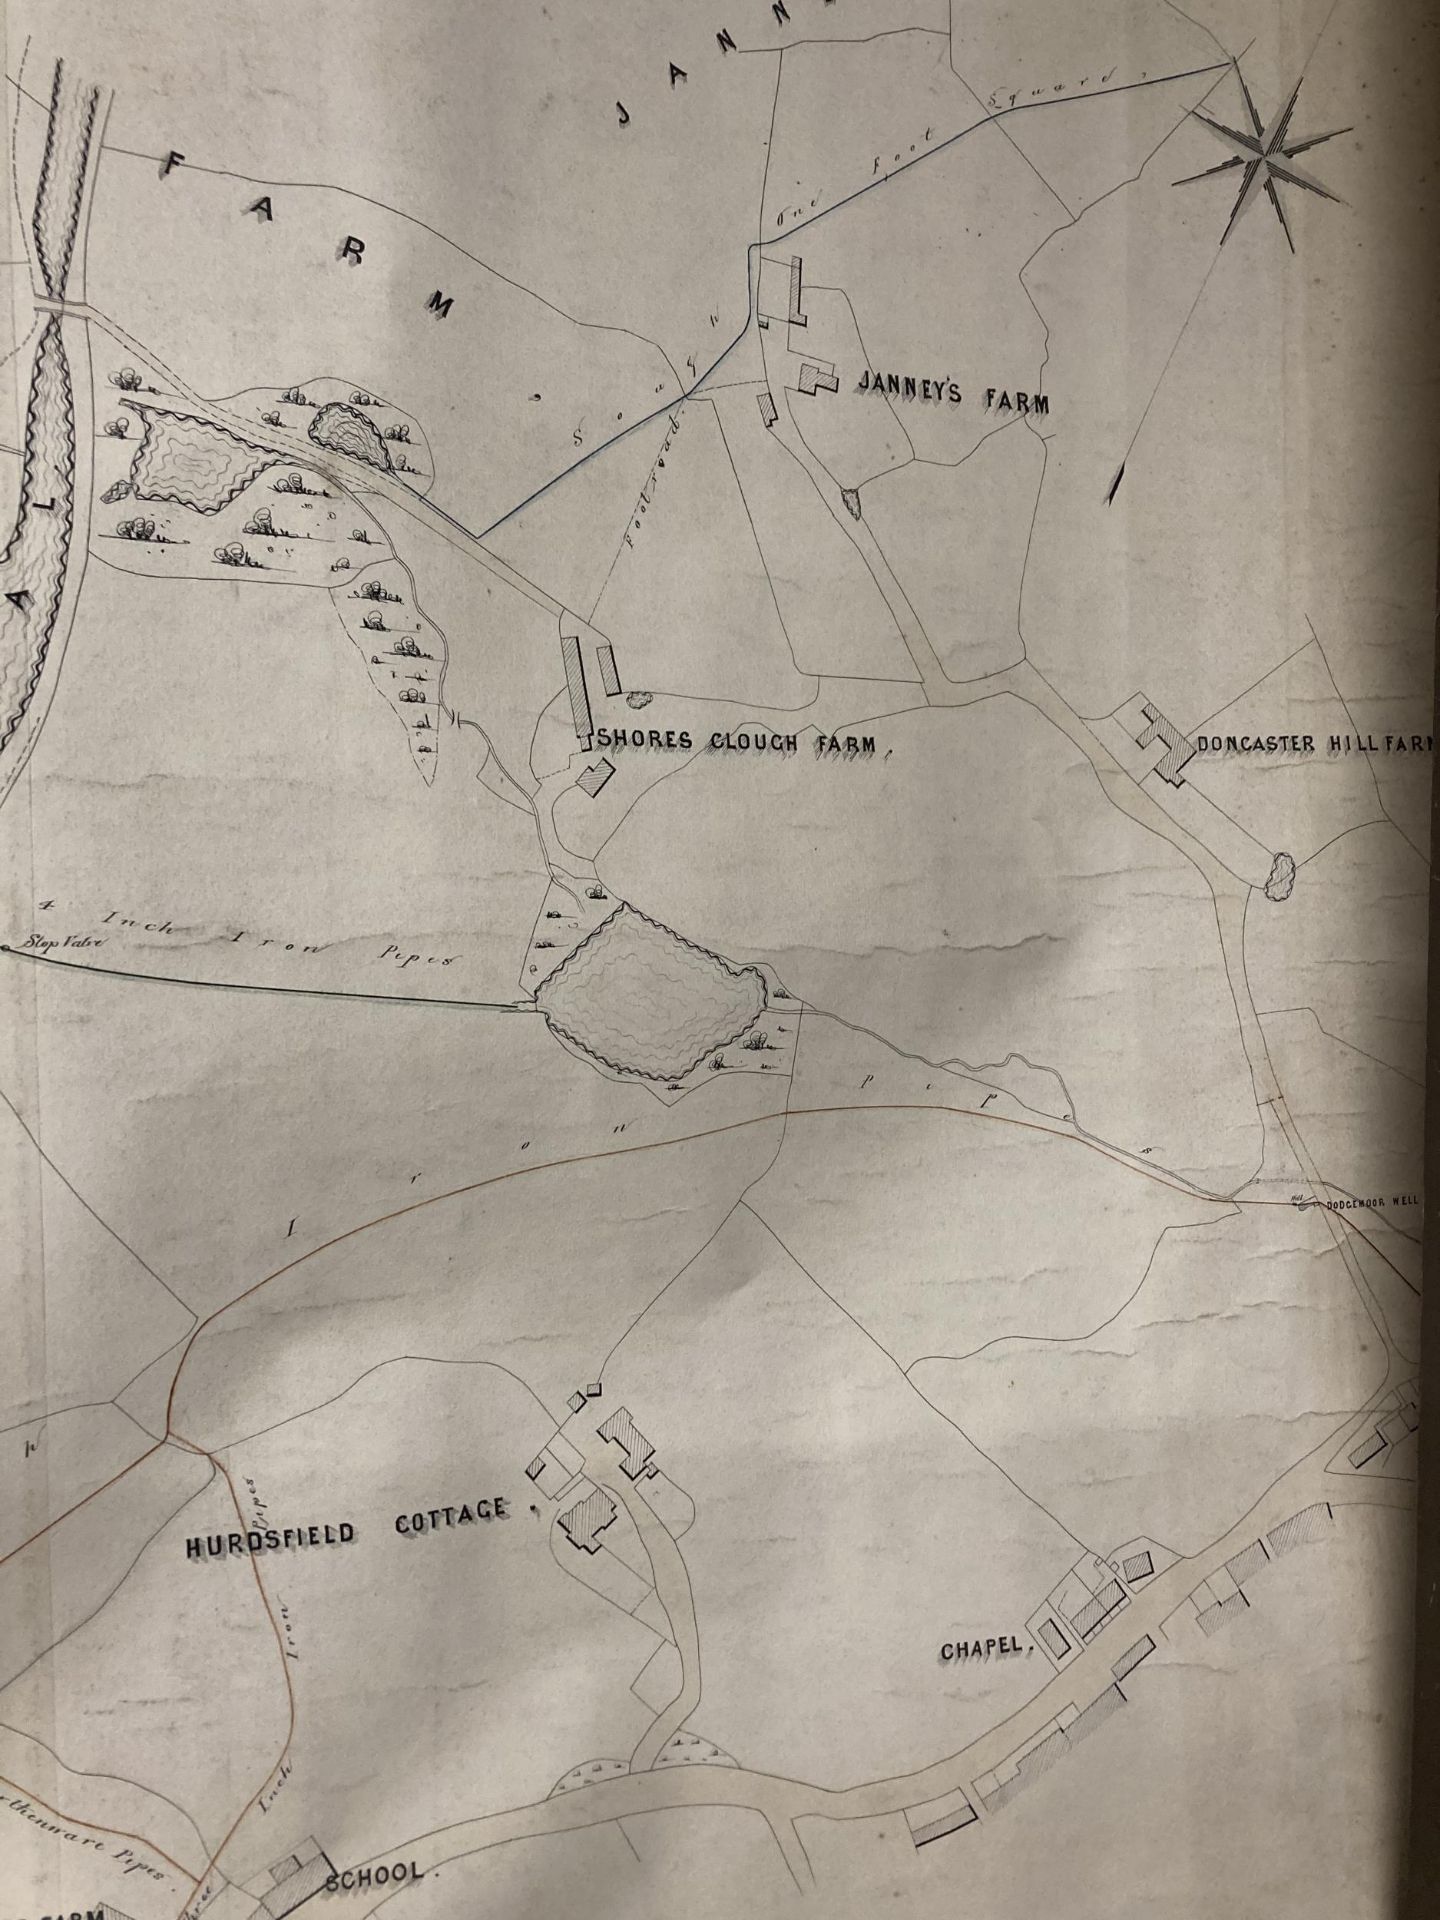 AN OLD ORDNANCE SURVEY MAP OF AREAS IN MACCLESFIELD TO INCLUDE MACCLESFIELD CANAL, HURDSFIELD HOUSE, - Image 3 of 5